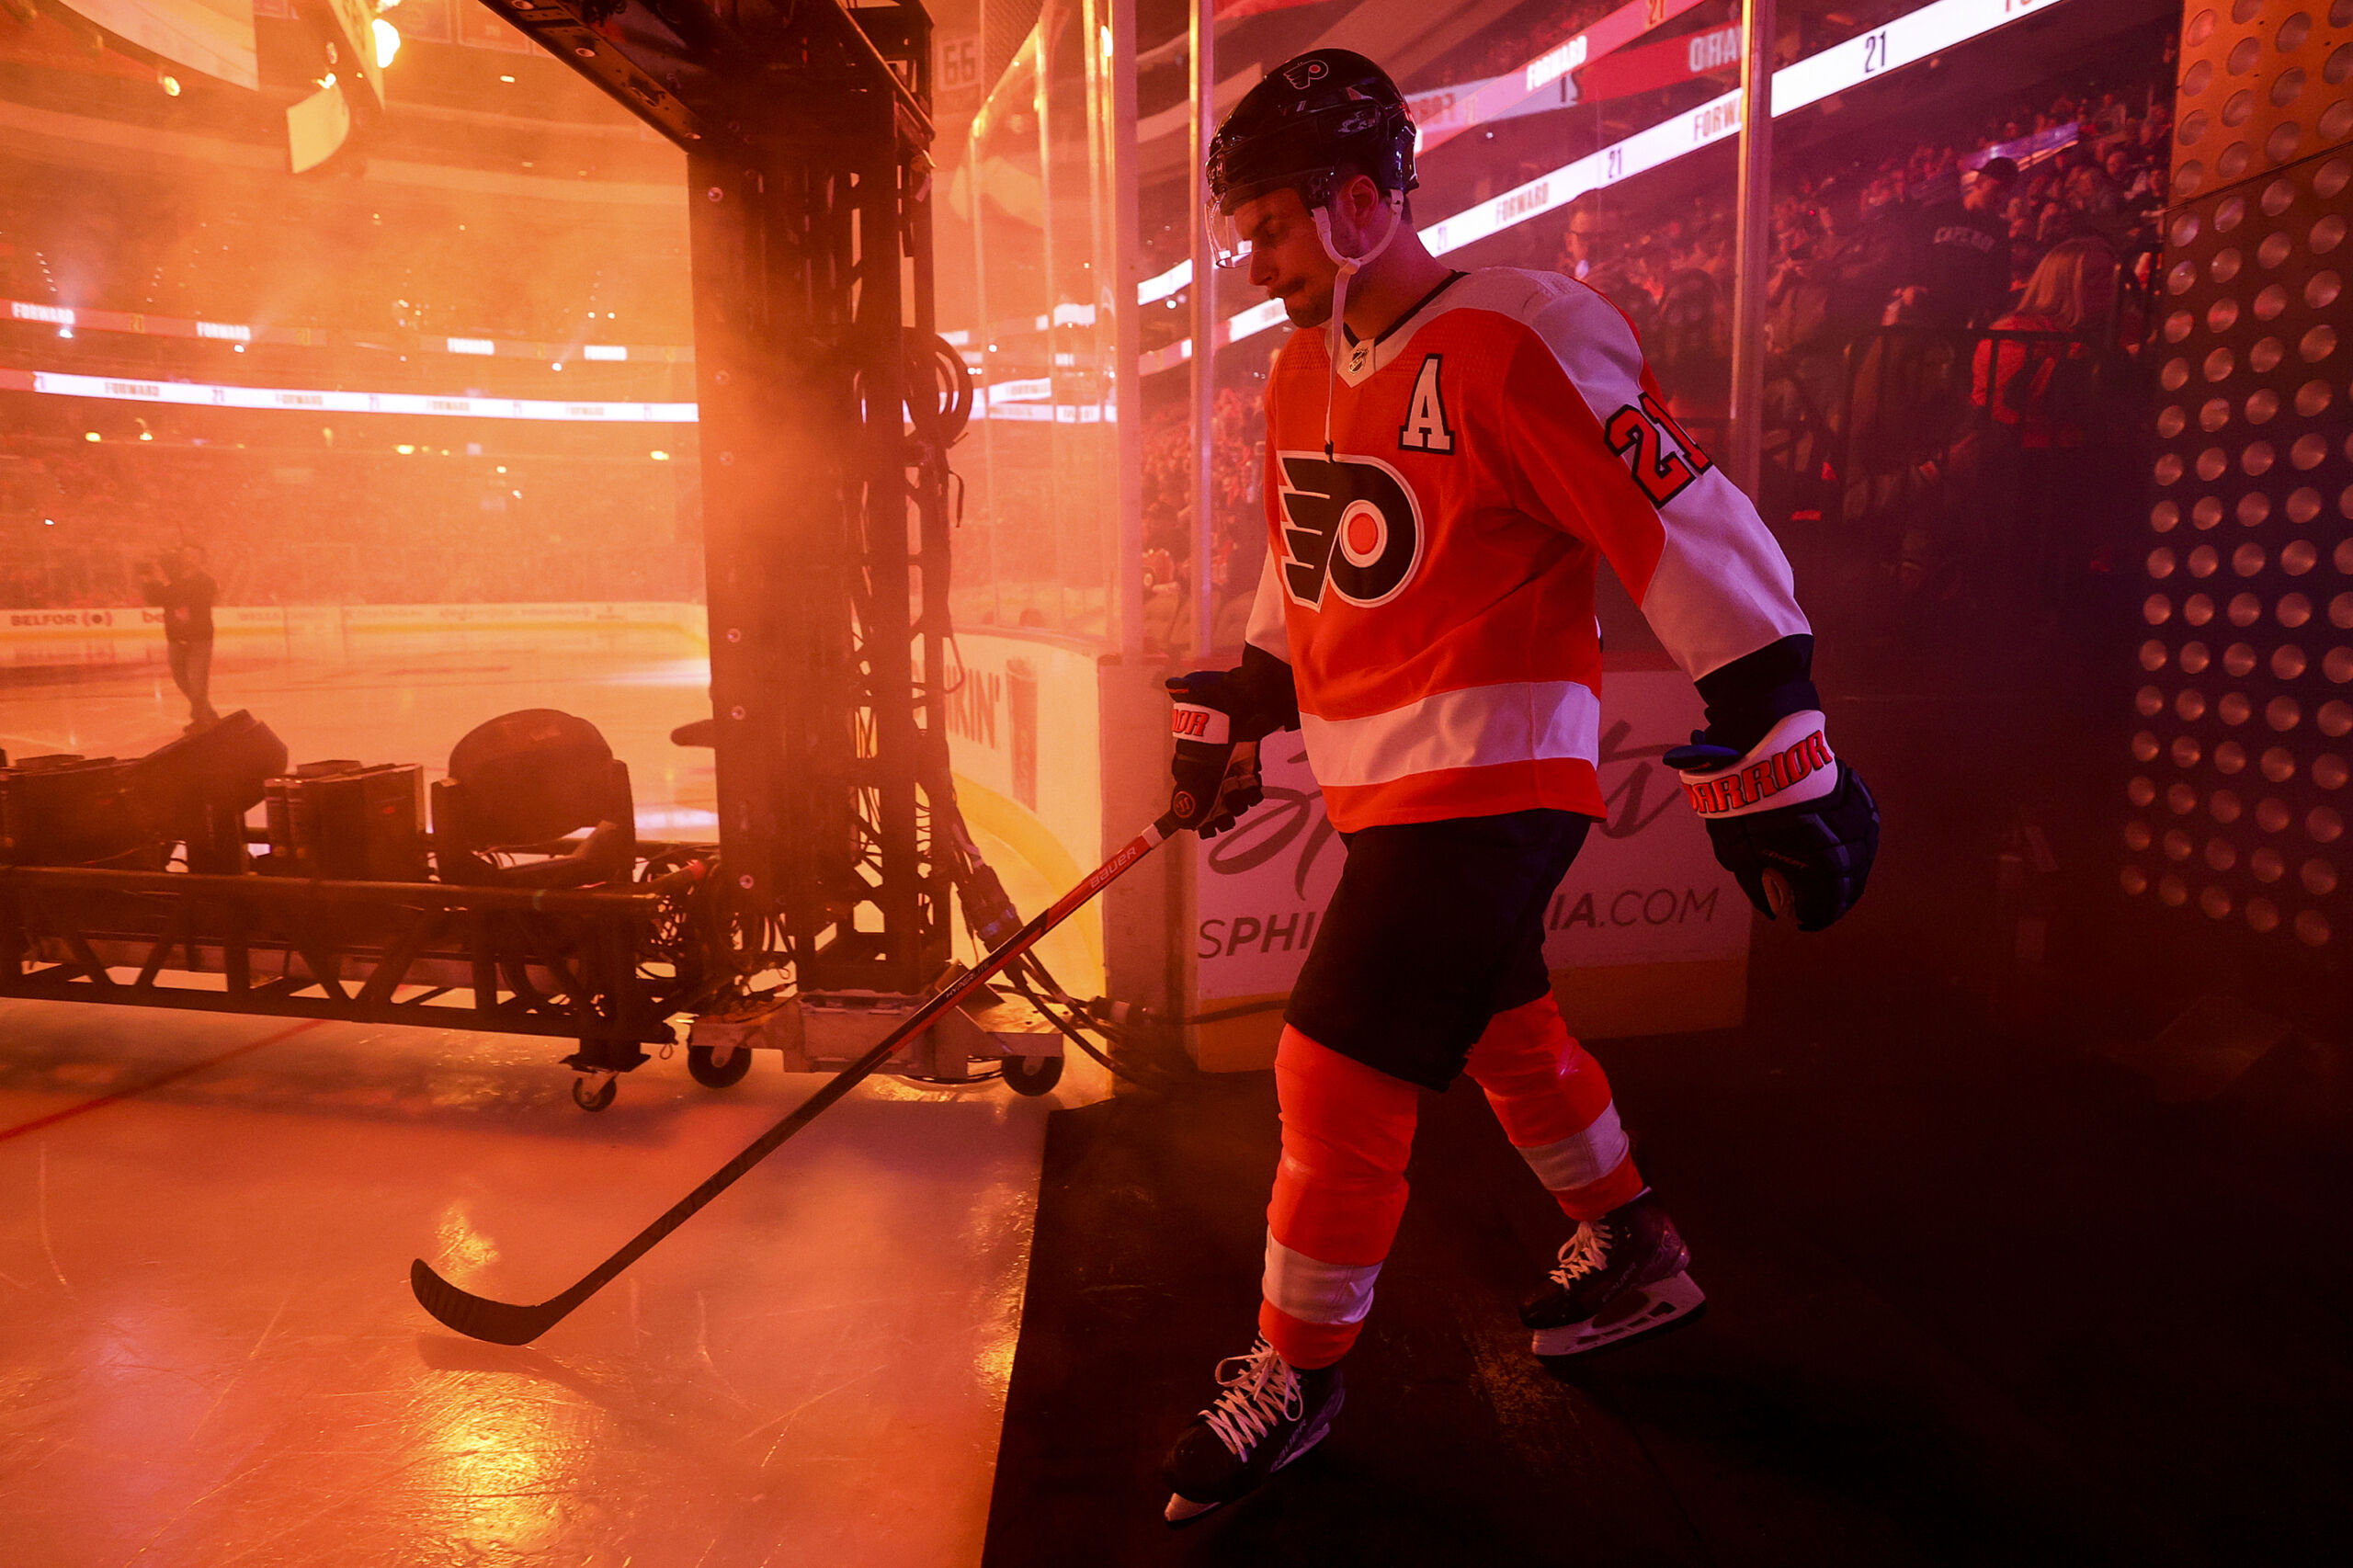 Who Could Be The Philadelphia Flyers Next Retired Number?